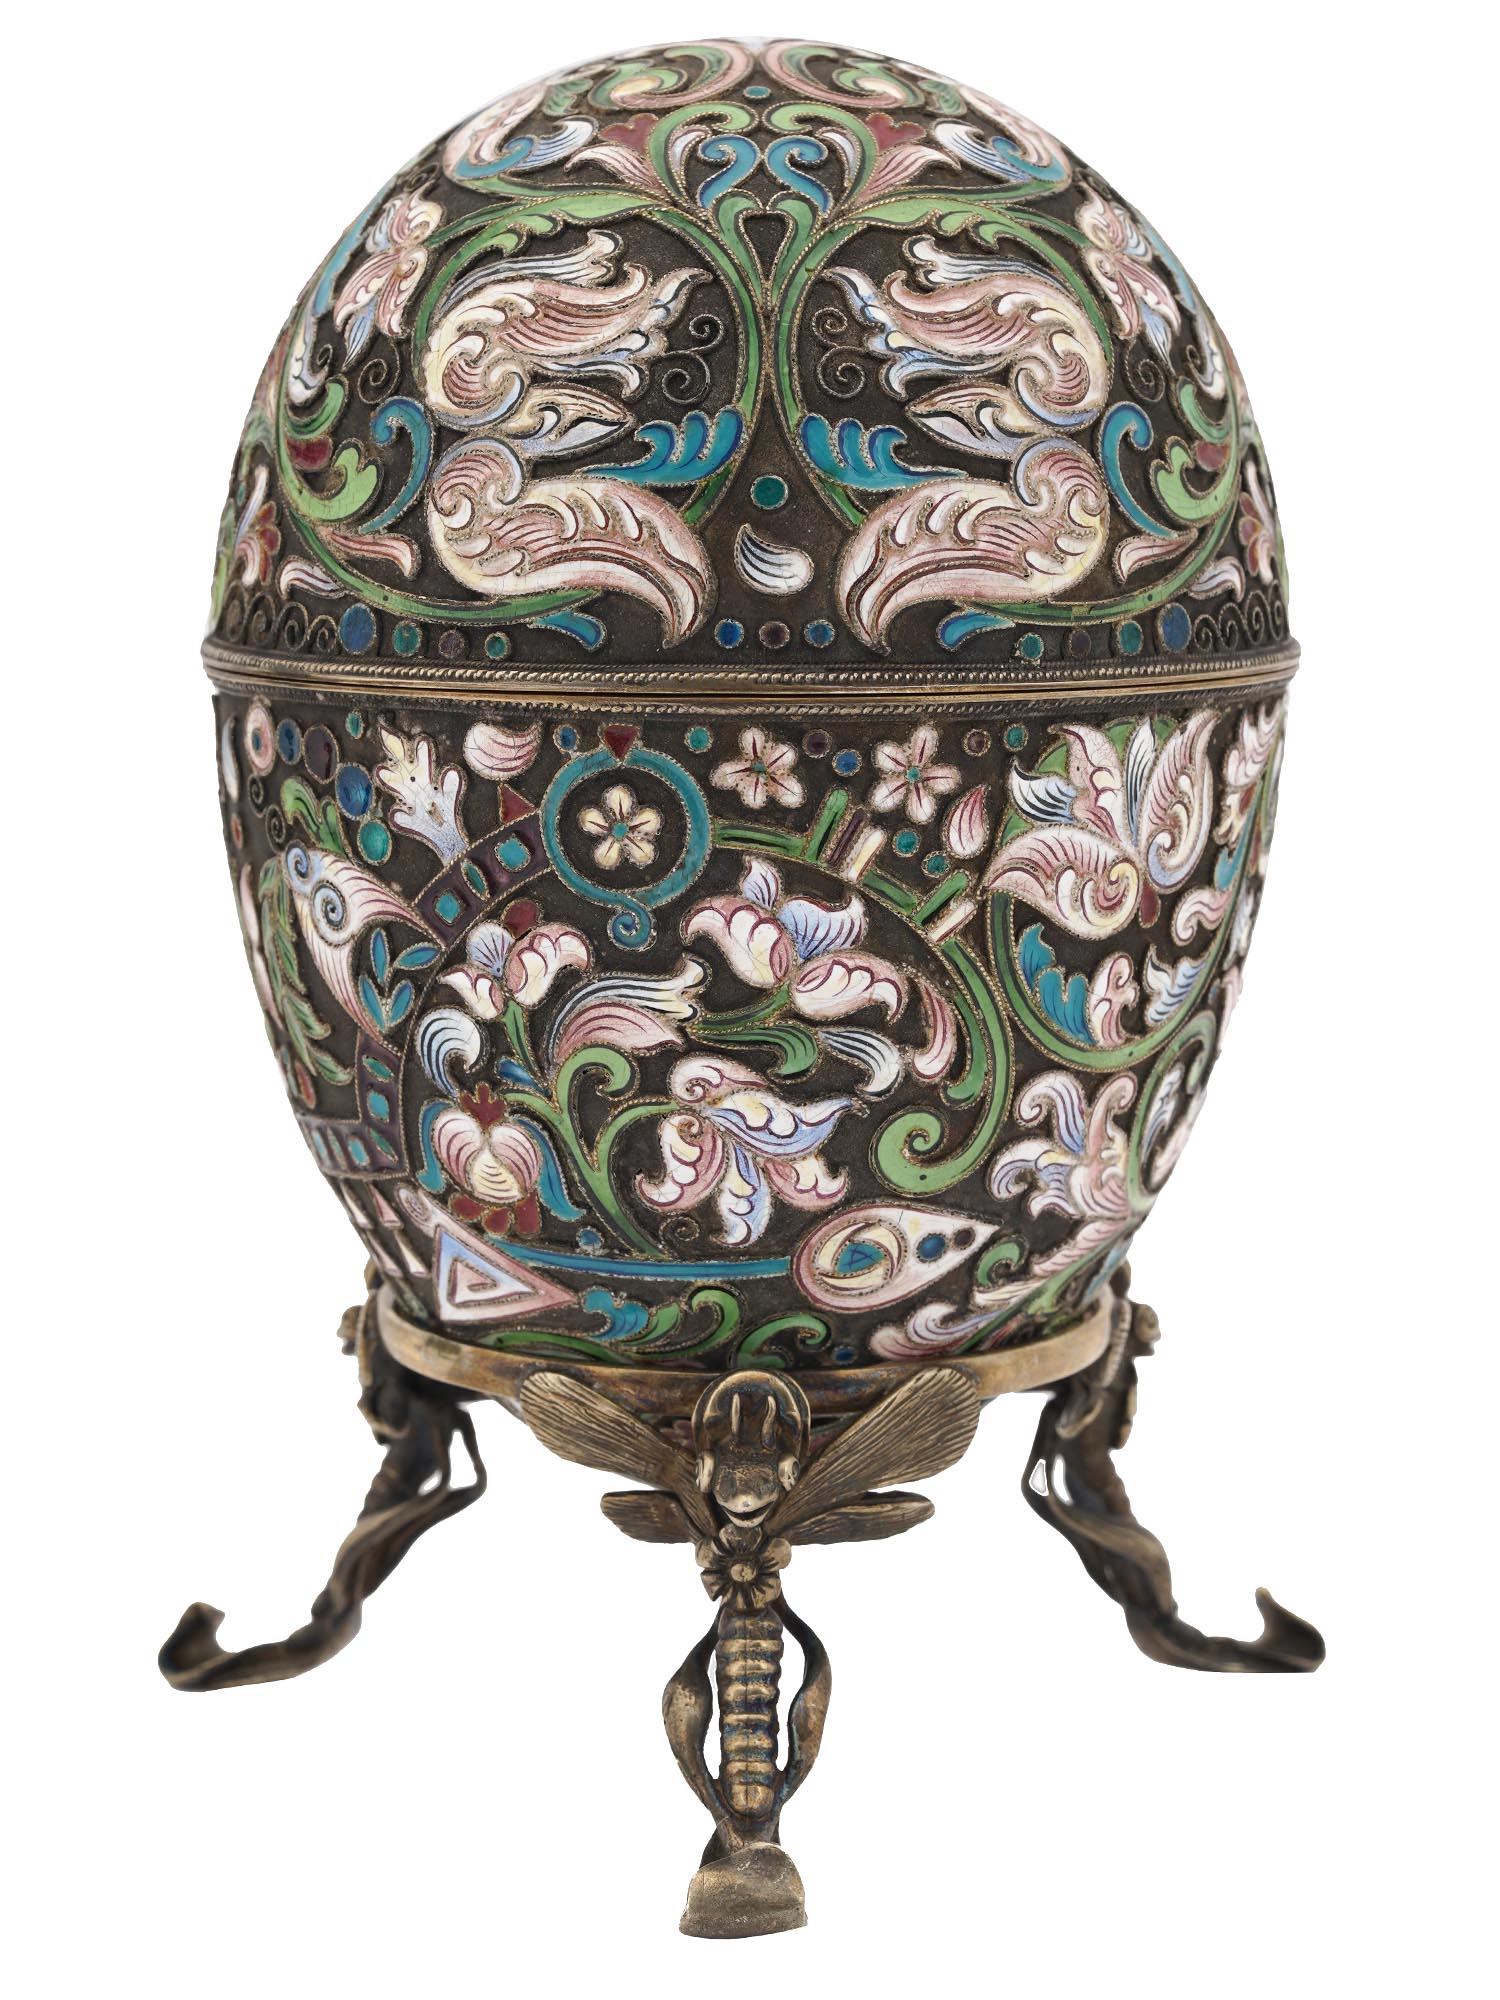 LARGE RUSSIAN SILVER CLOISONNE ENAMEL EGG W STAND PIC-1